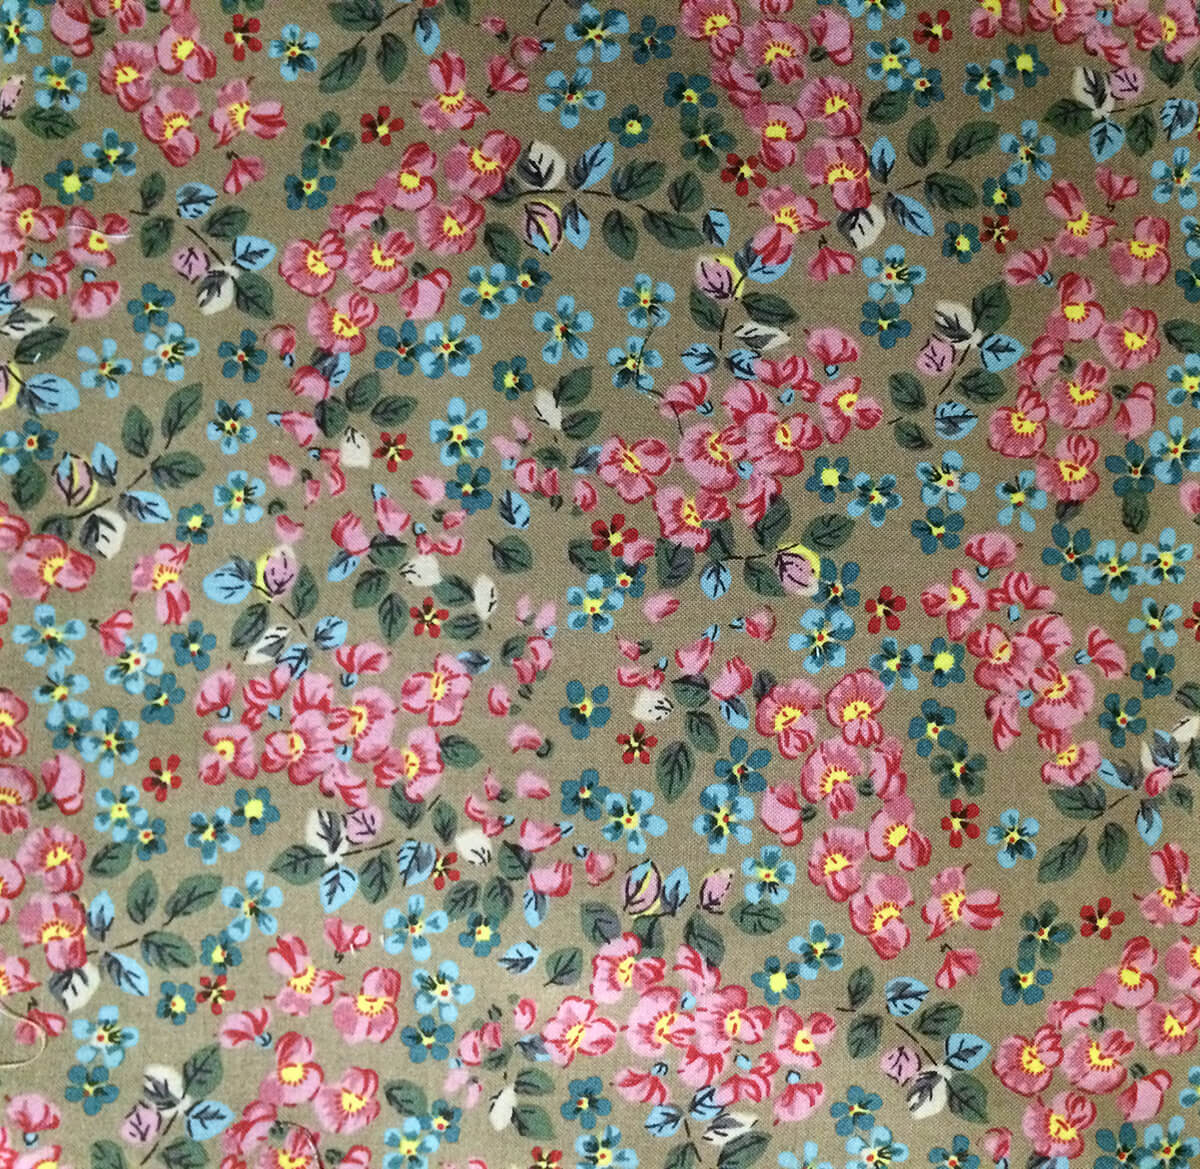 Photo of an example of calico fabric